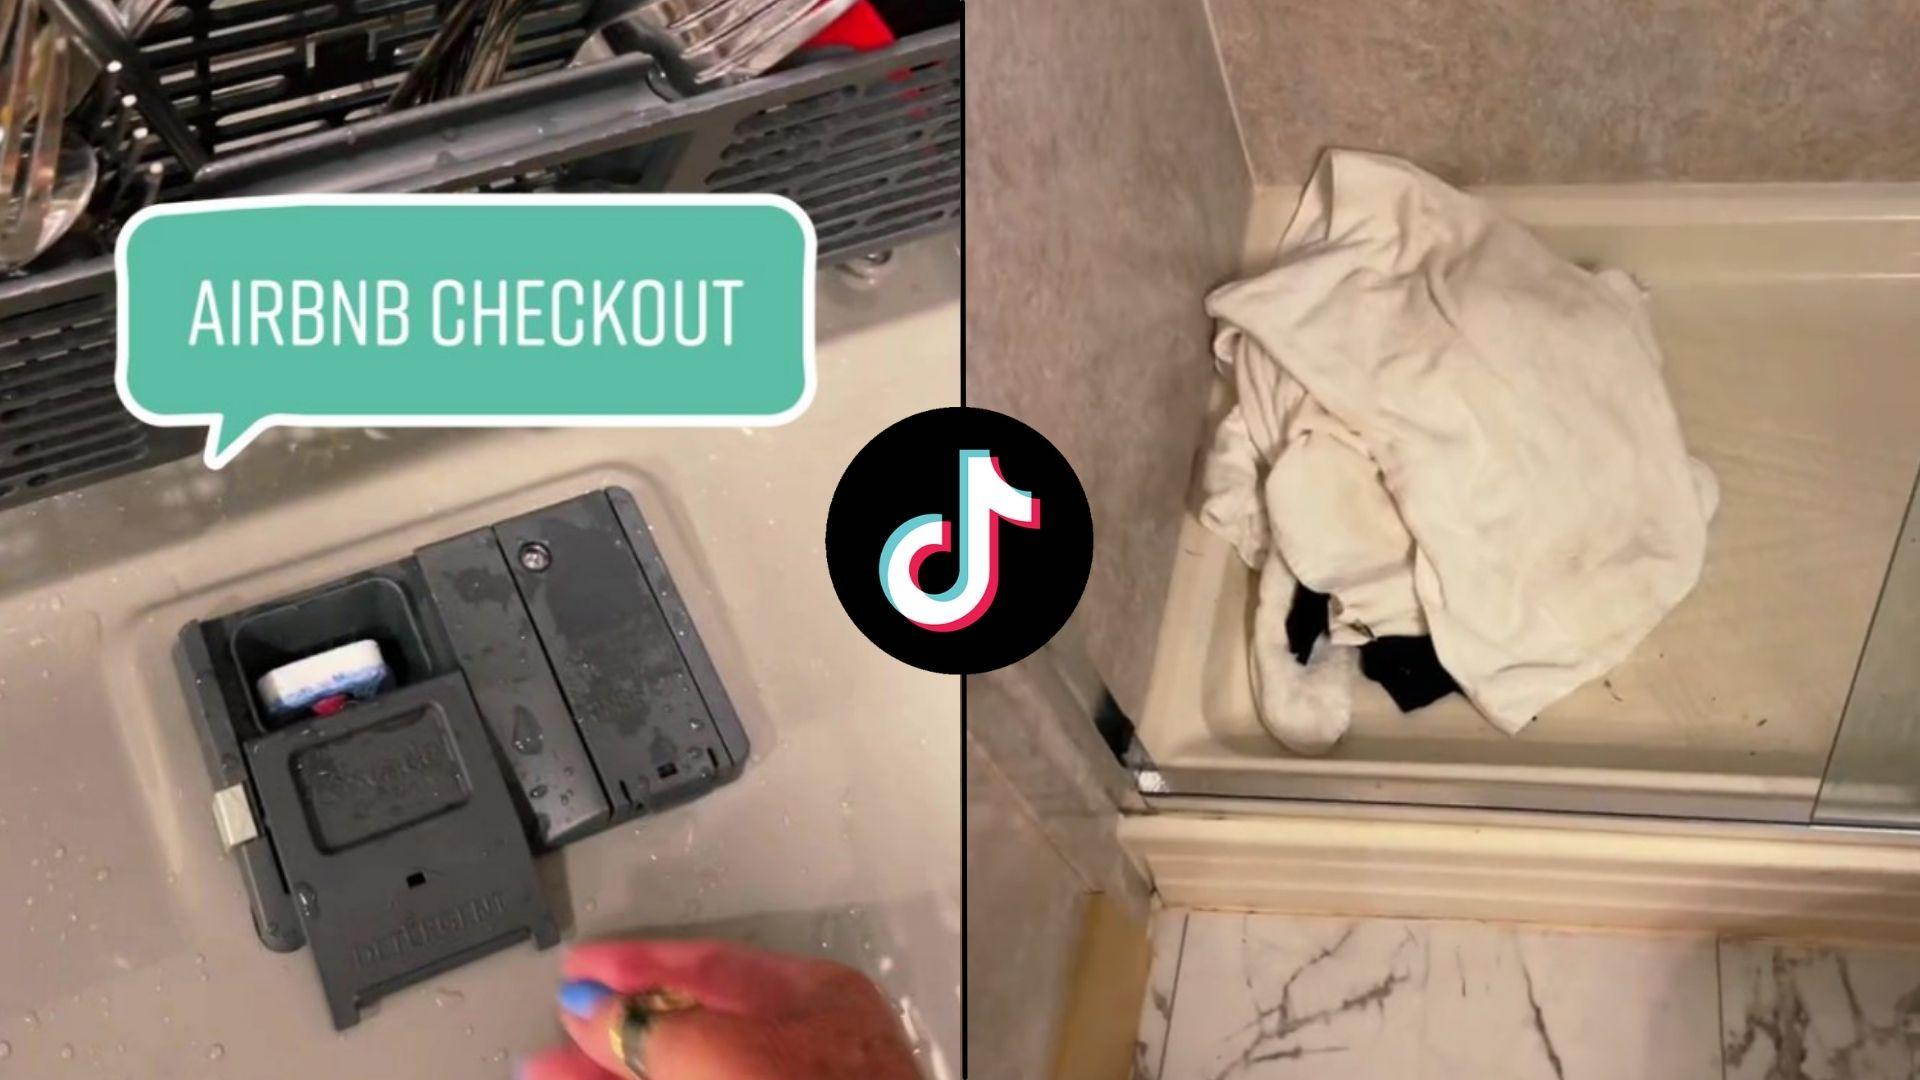 Screenshots of TikTok video with airbnb checkout text and towels in wash